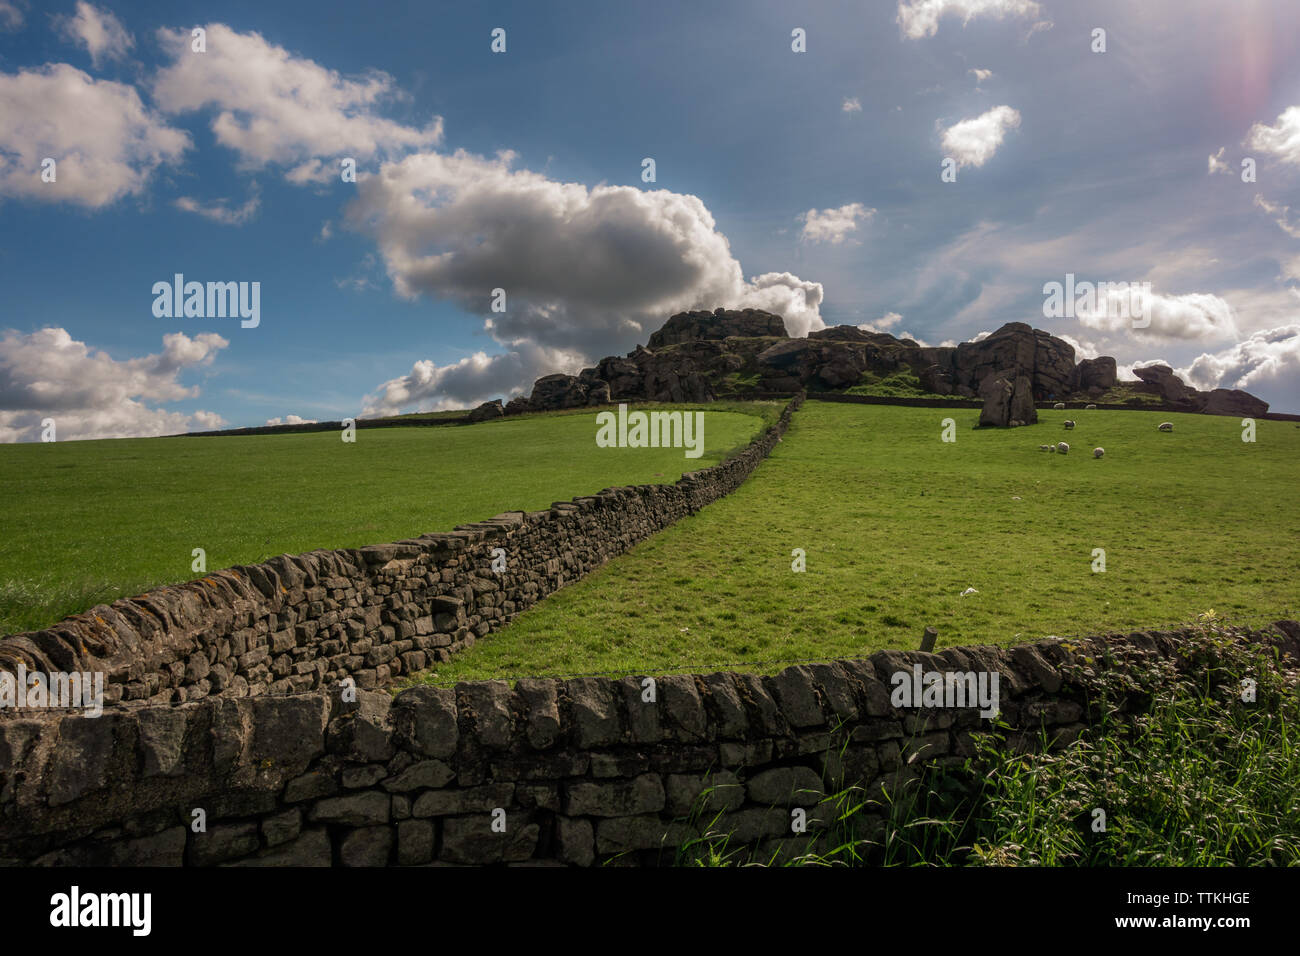 UK landscape: View of Almscliffe Crag from the behind a stone wall, North Yorkshire Stock Photo